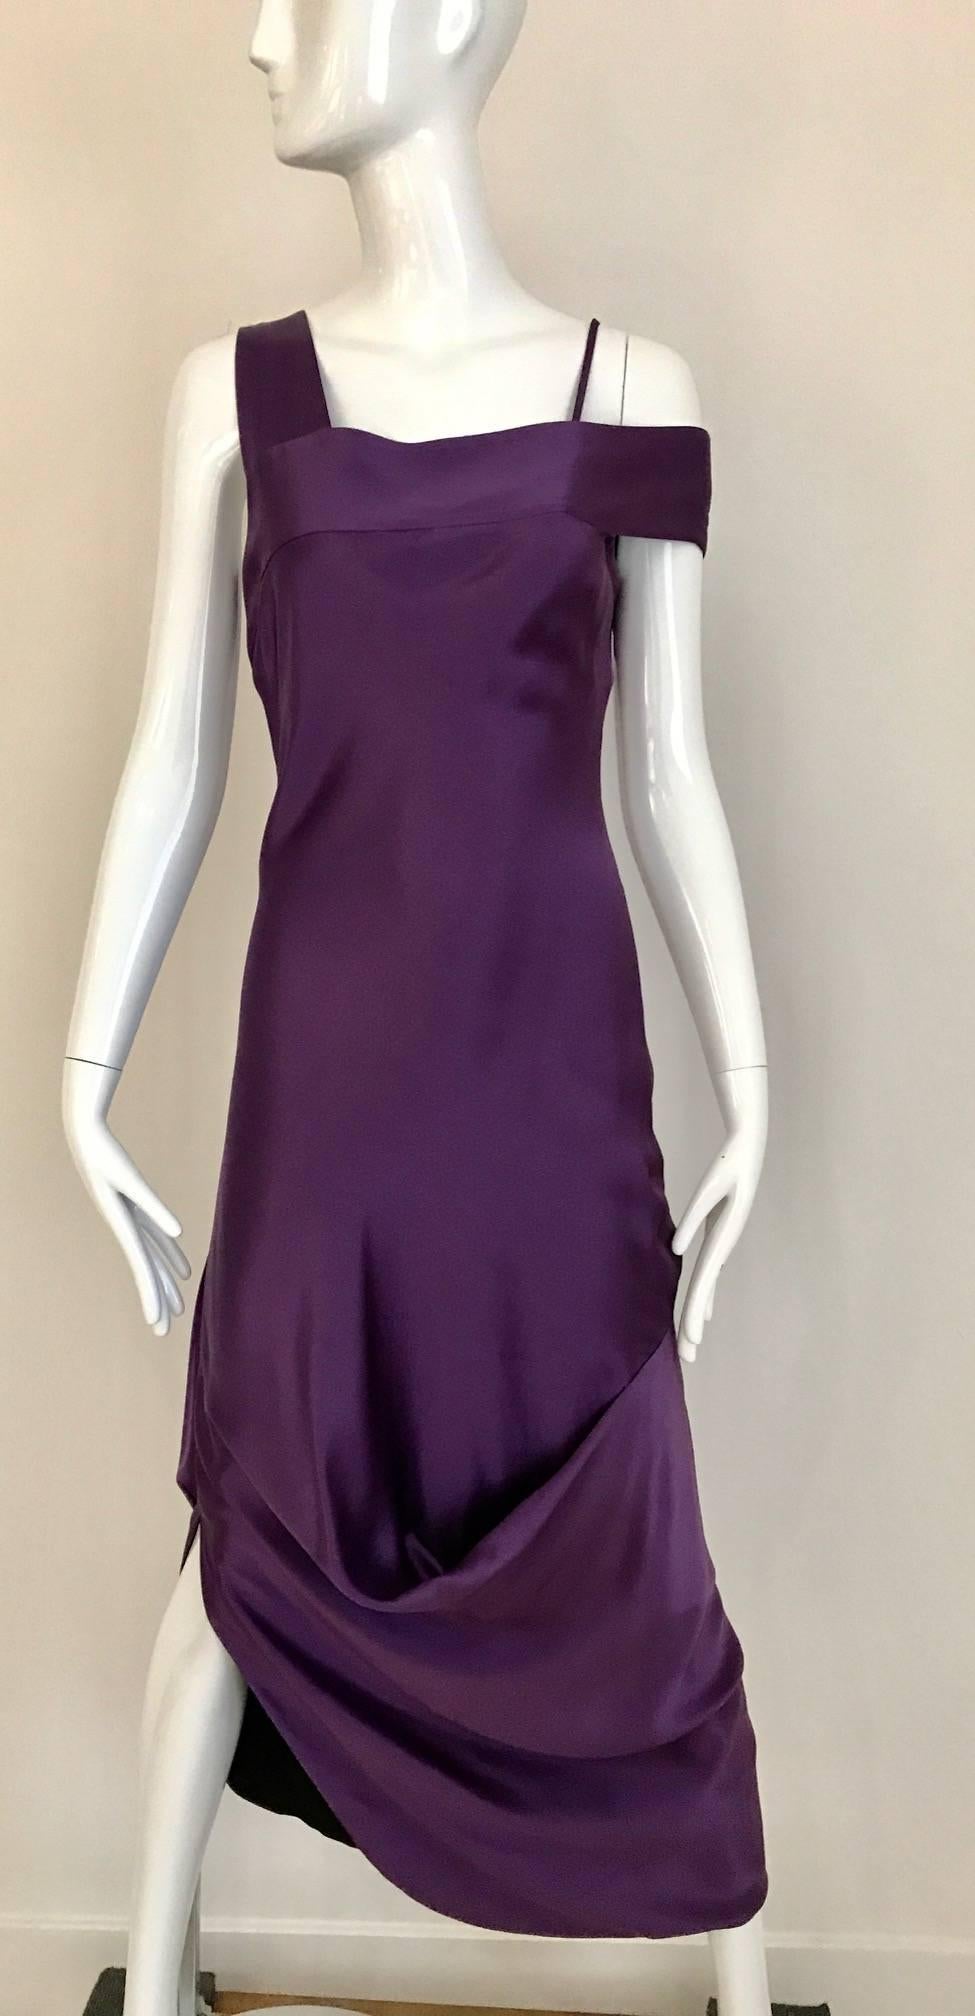 Vintage Alexander Mcqueen violet silk charmeuse Grecian gown with incredible drape and asymmetrical shoulder.   Fit Size: 4/6 Small- Medium 
Bust: 34 inch  / Waist: 30 inch  /Hip: 38 inch/  Dress Length: 55 inch
**** This Garment has been